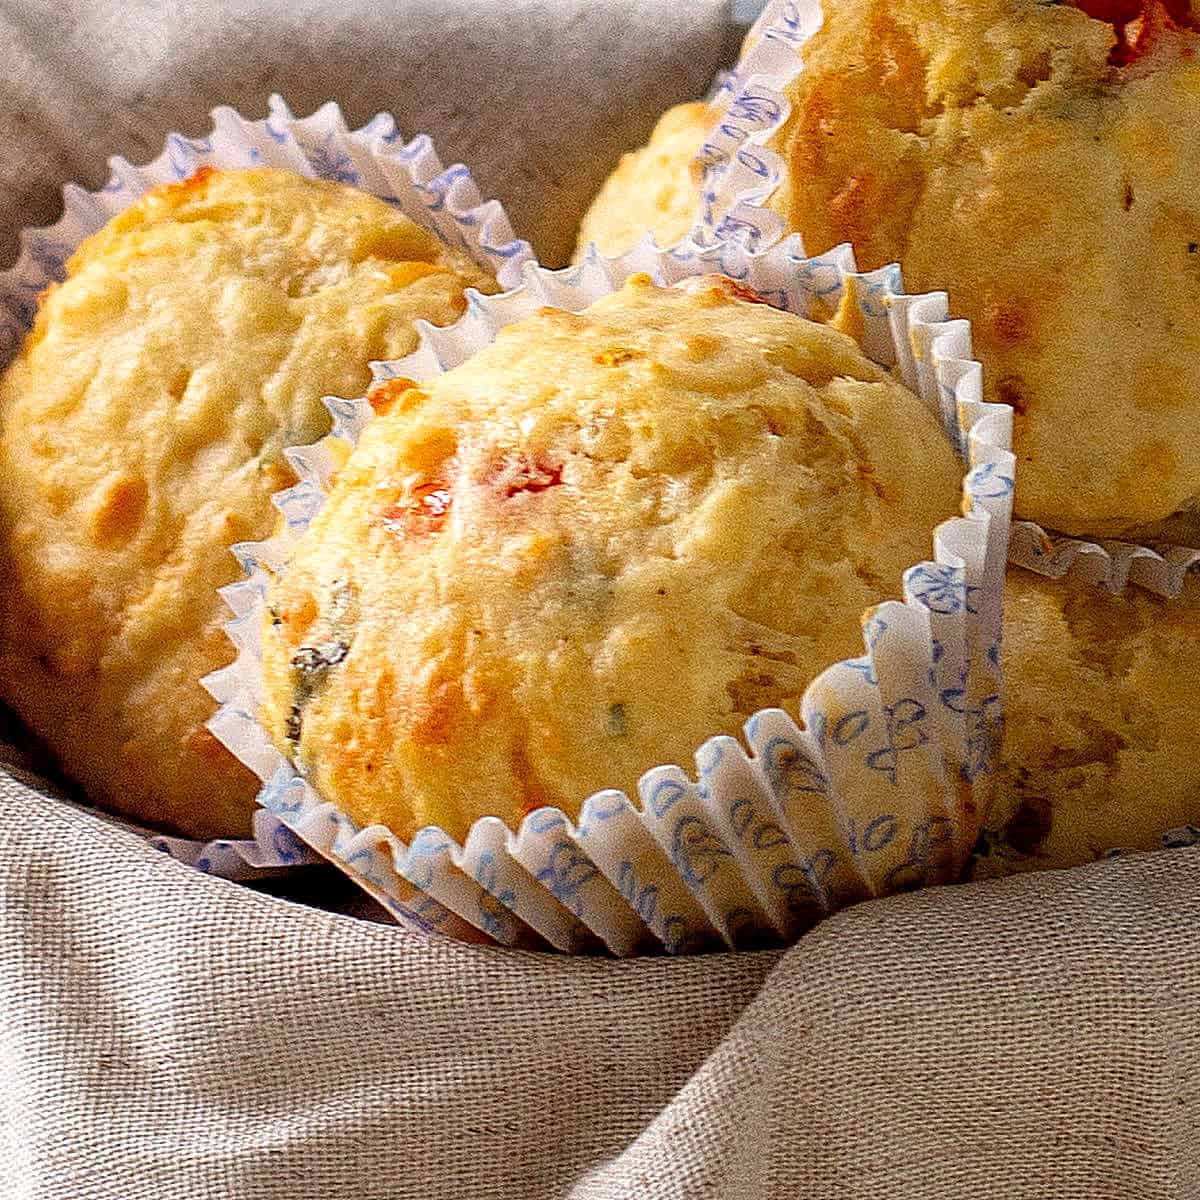 Whole muffins in paper cups on top of a beige piece of linen